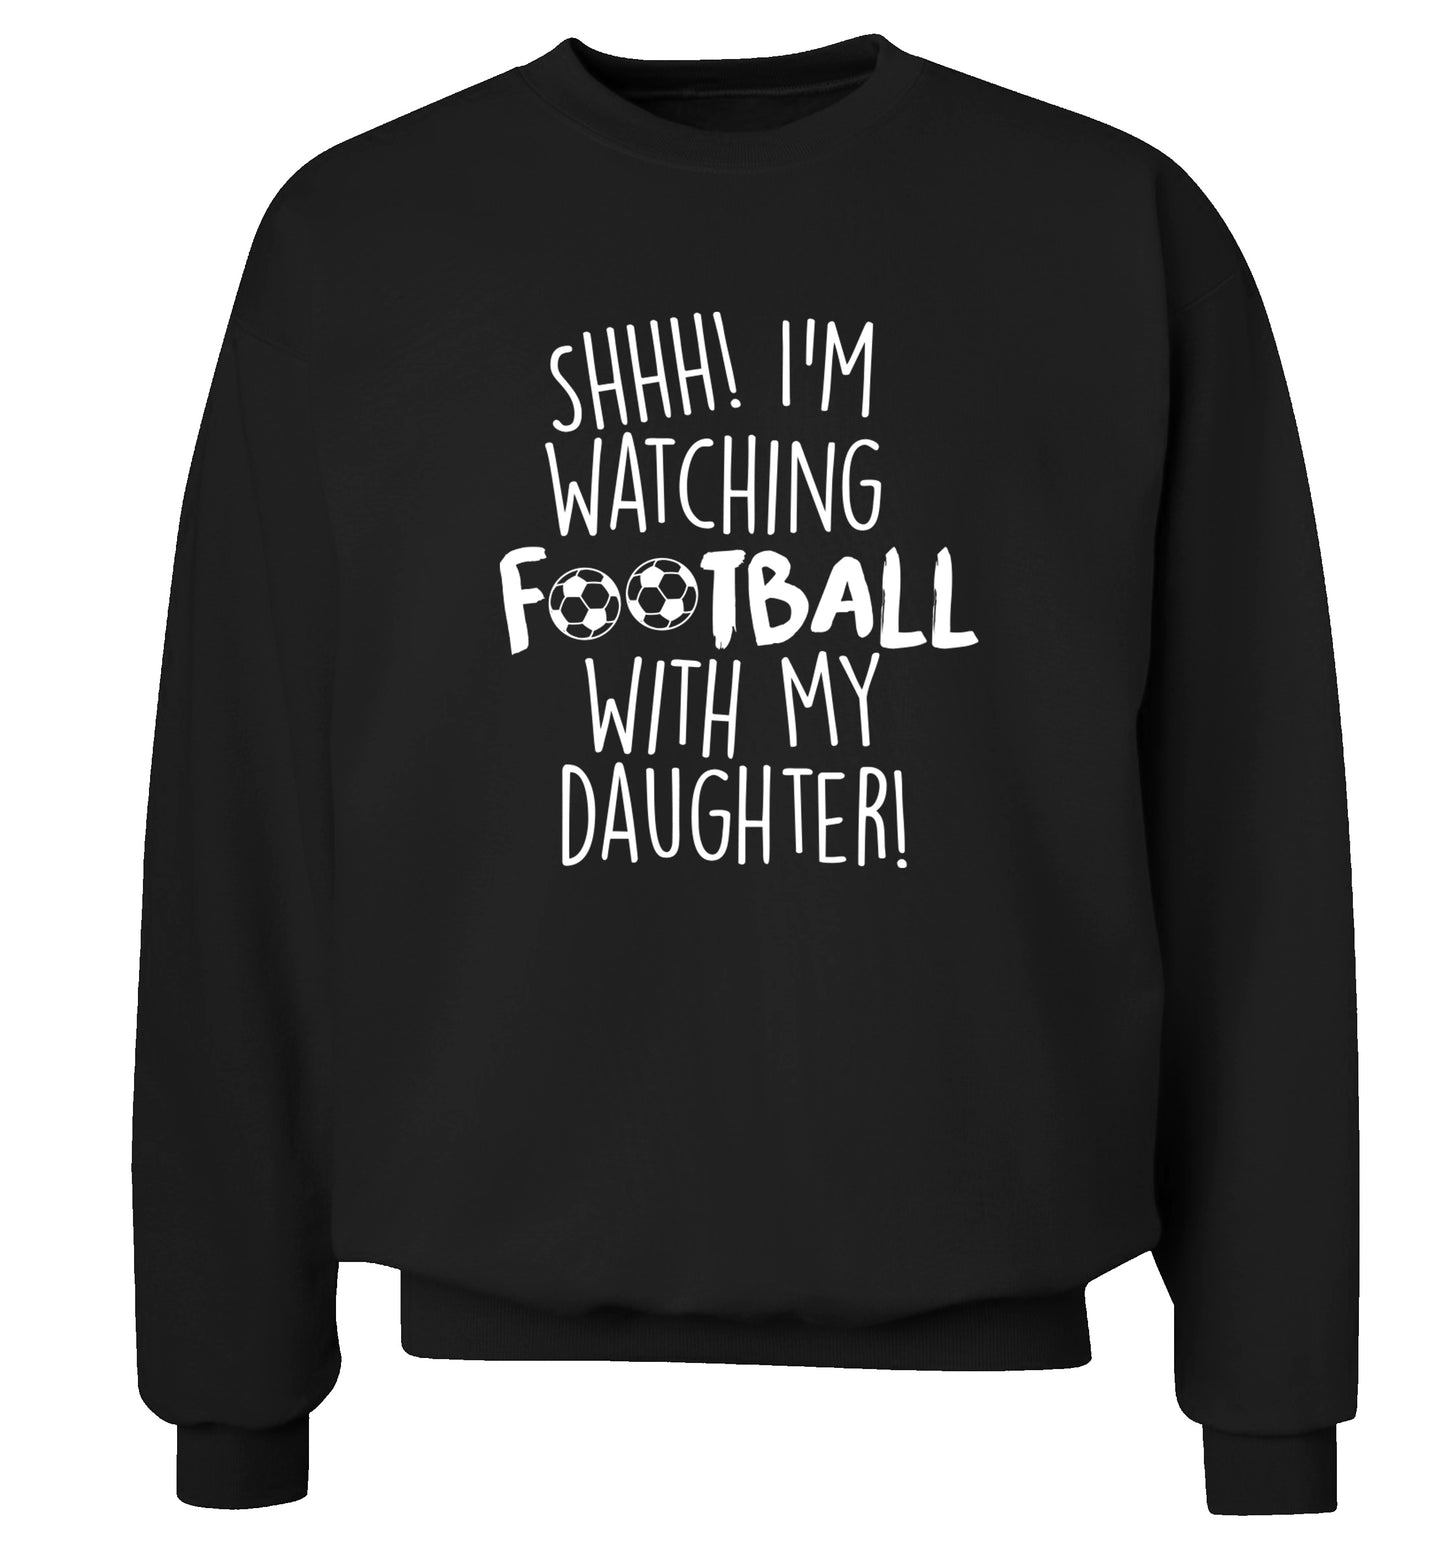 Shhh I'm watching football with my daughter Adult's unisexblack Sweater 2XL